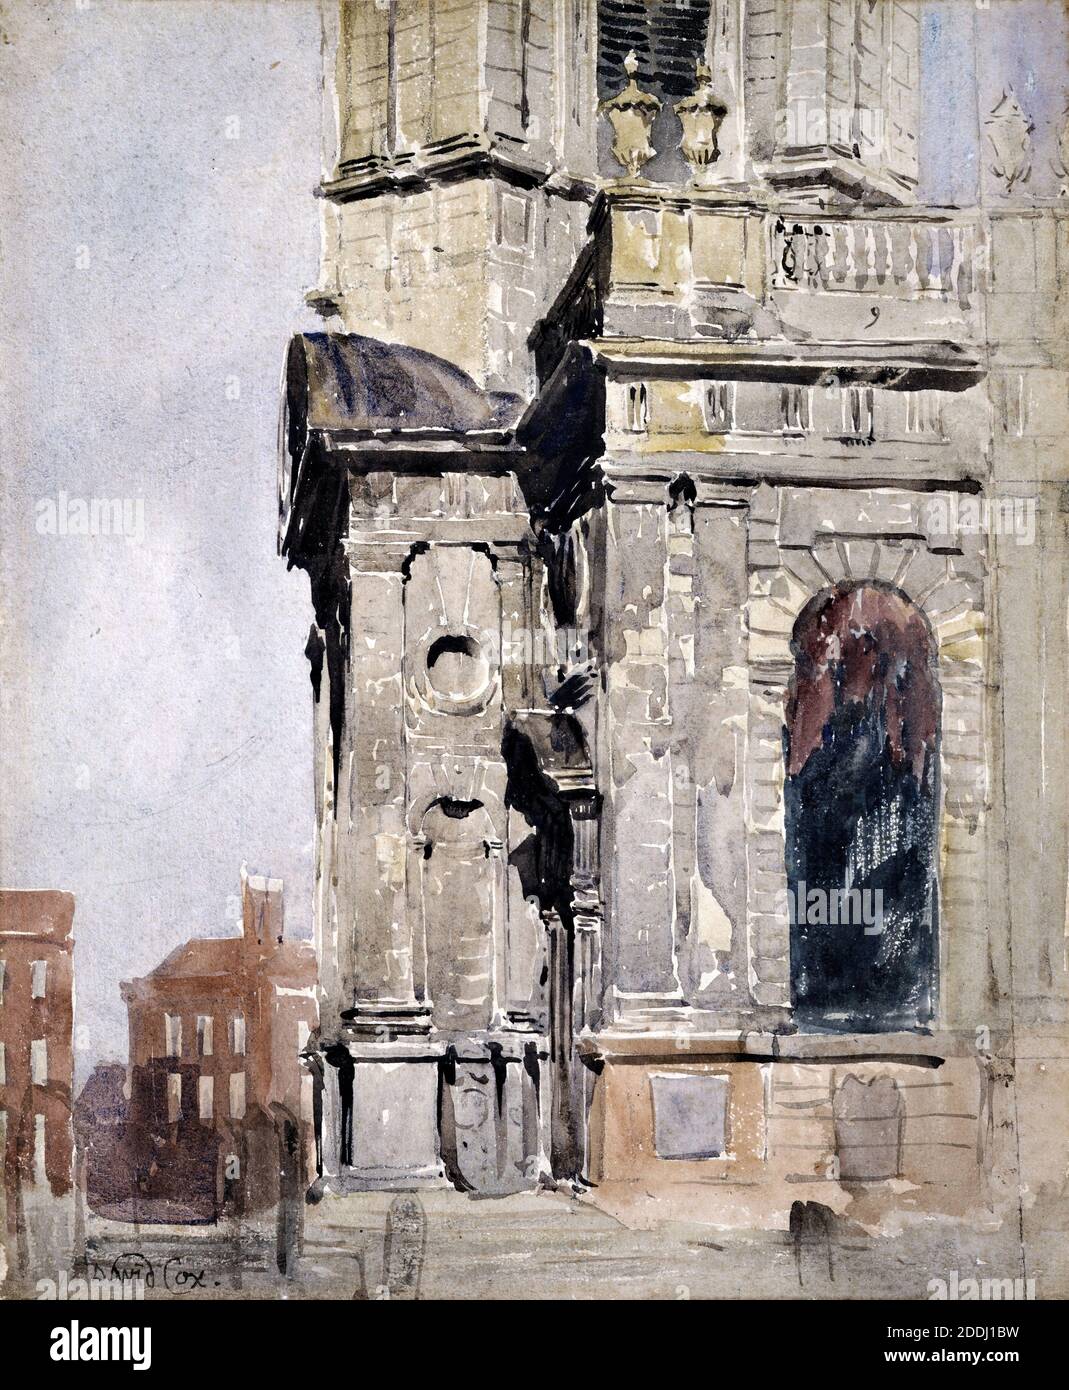 Porch of St Philip's Cathedral, Birmingham, 1836 By: David Cox, Watercolour, Topographical Views, Birmingham history, England, Midlands Stock Photo